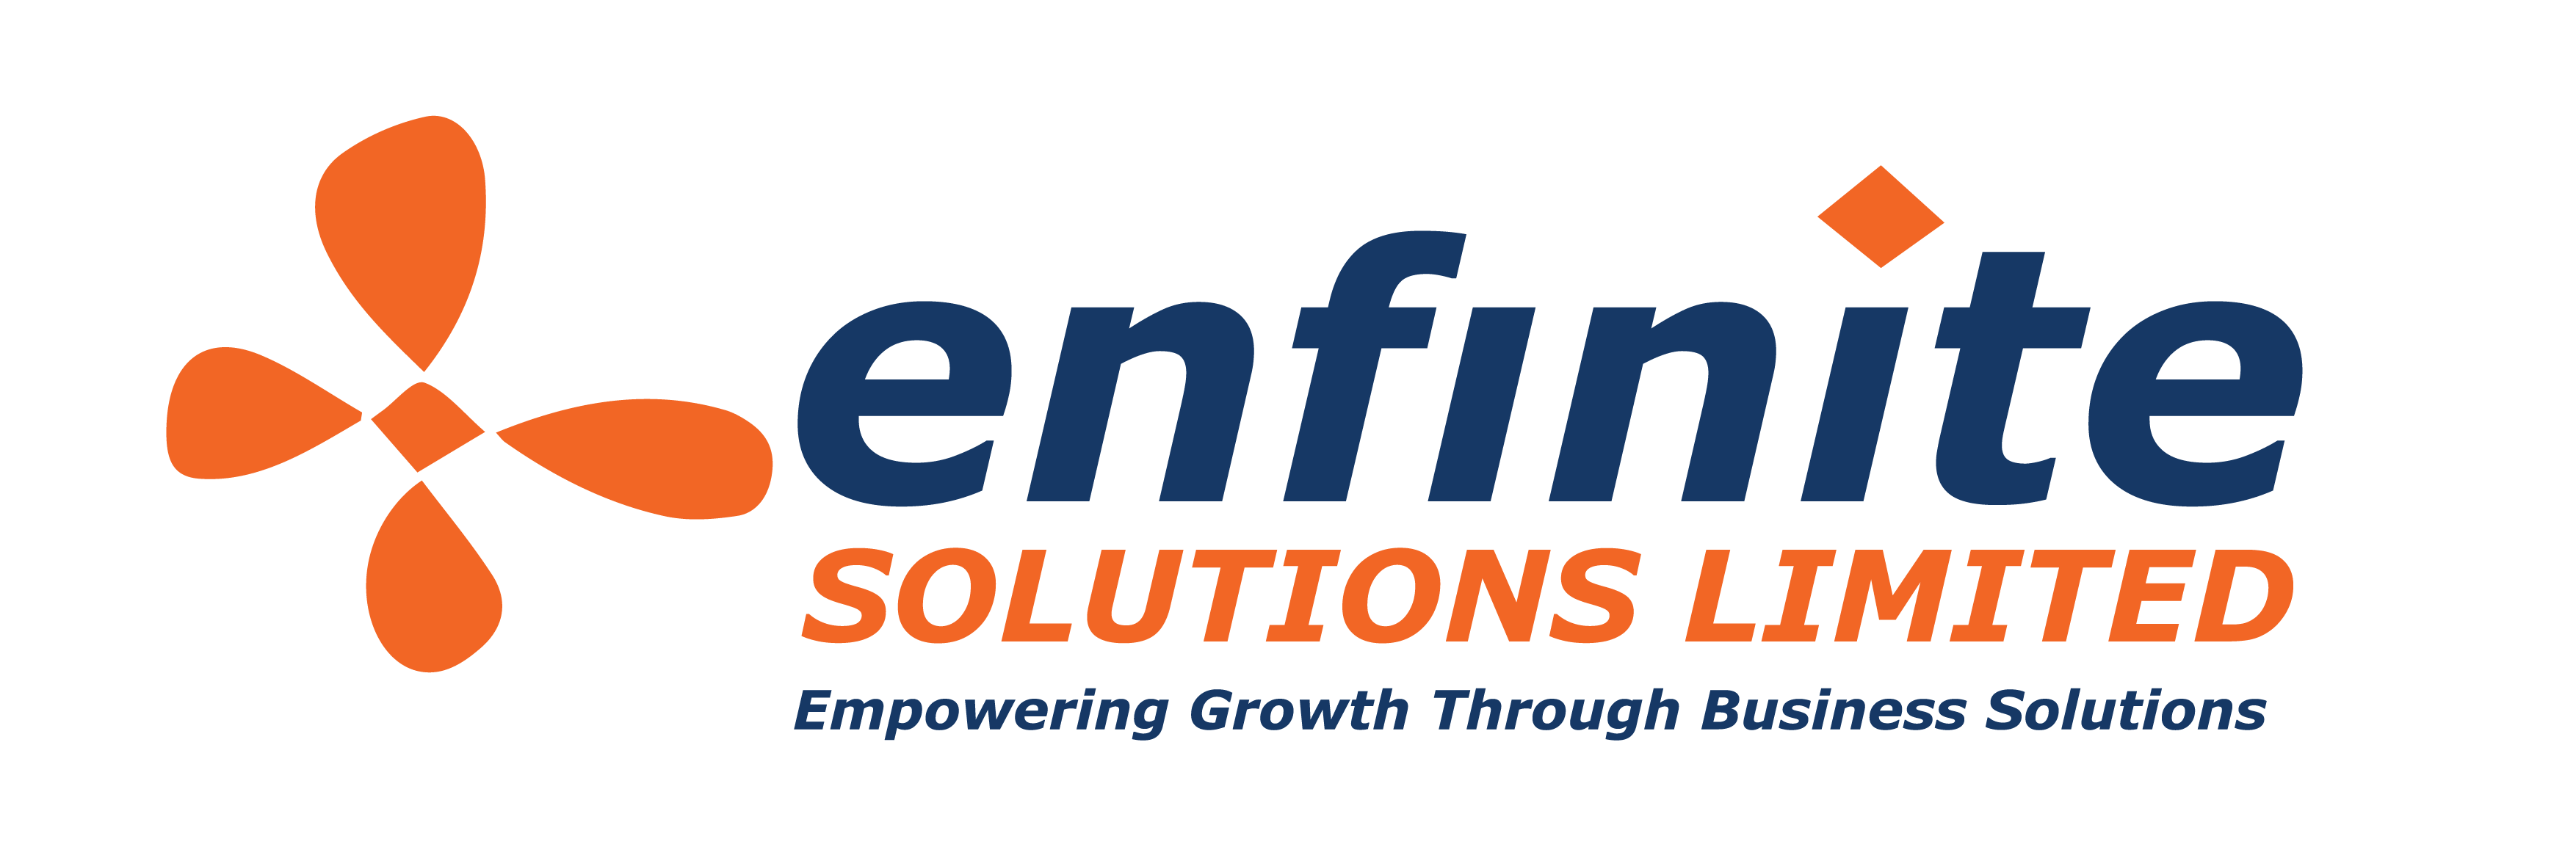 Enfinite Solutions Limited